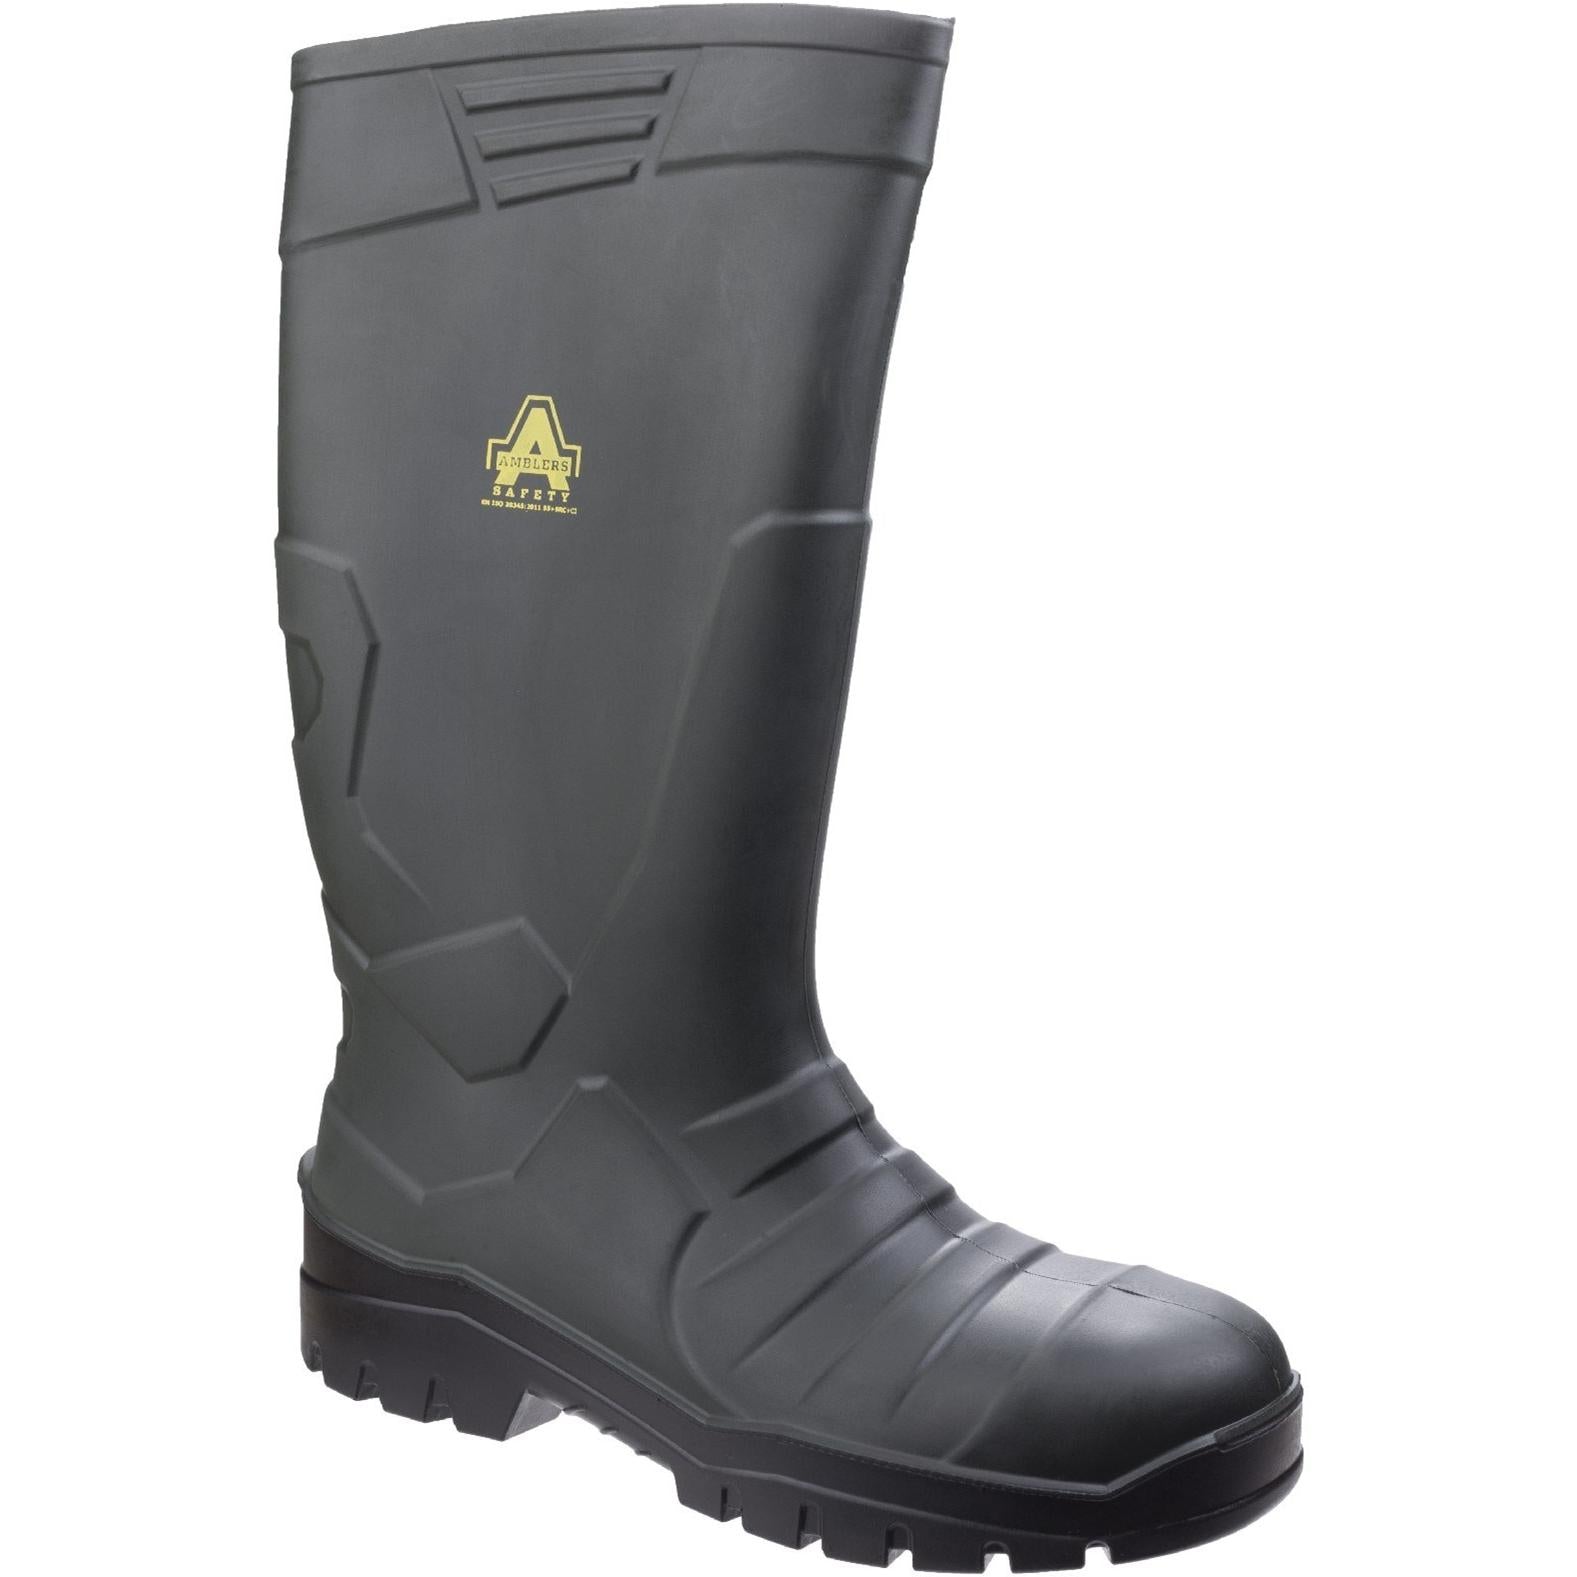 Amblers Safety AS1005 Full Safety Wellington Boots